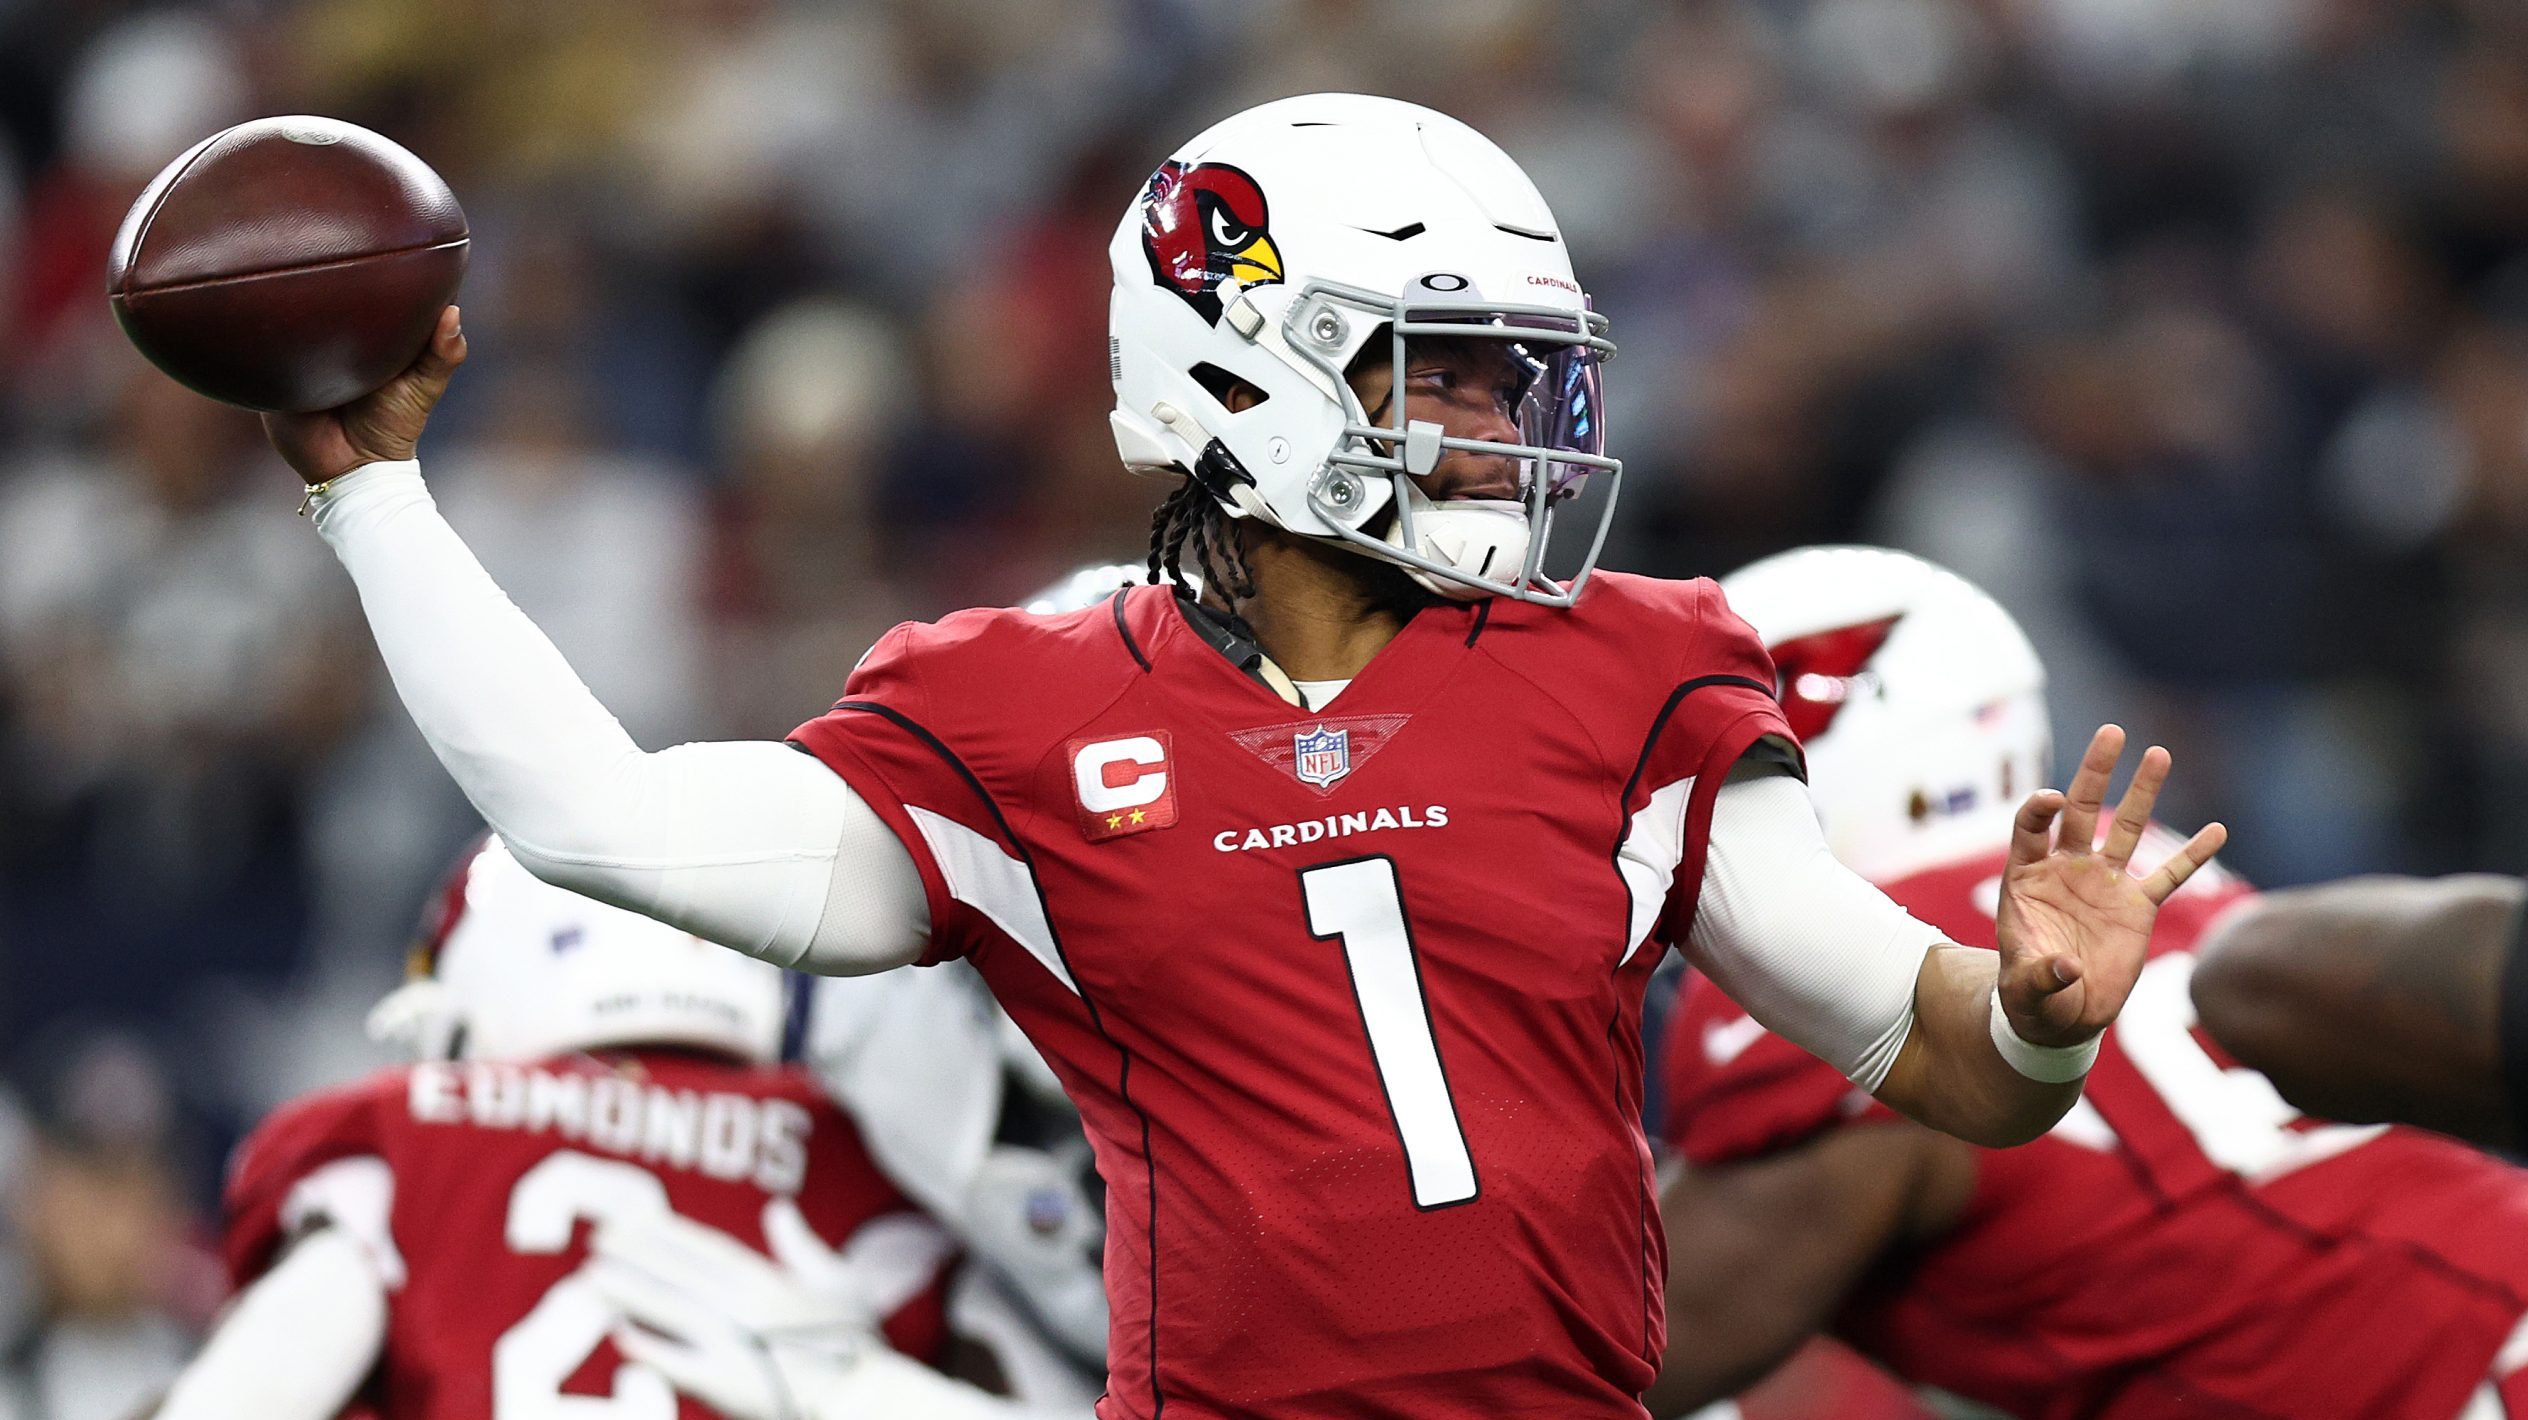 Ertz: Outside expectations want Kyler Murray to be 'prototypical Tom Brady'